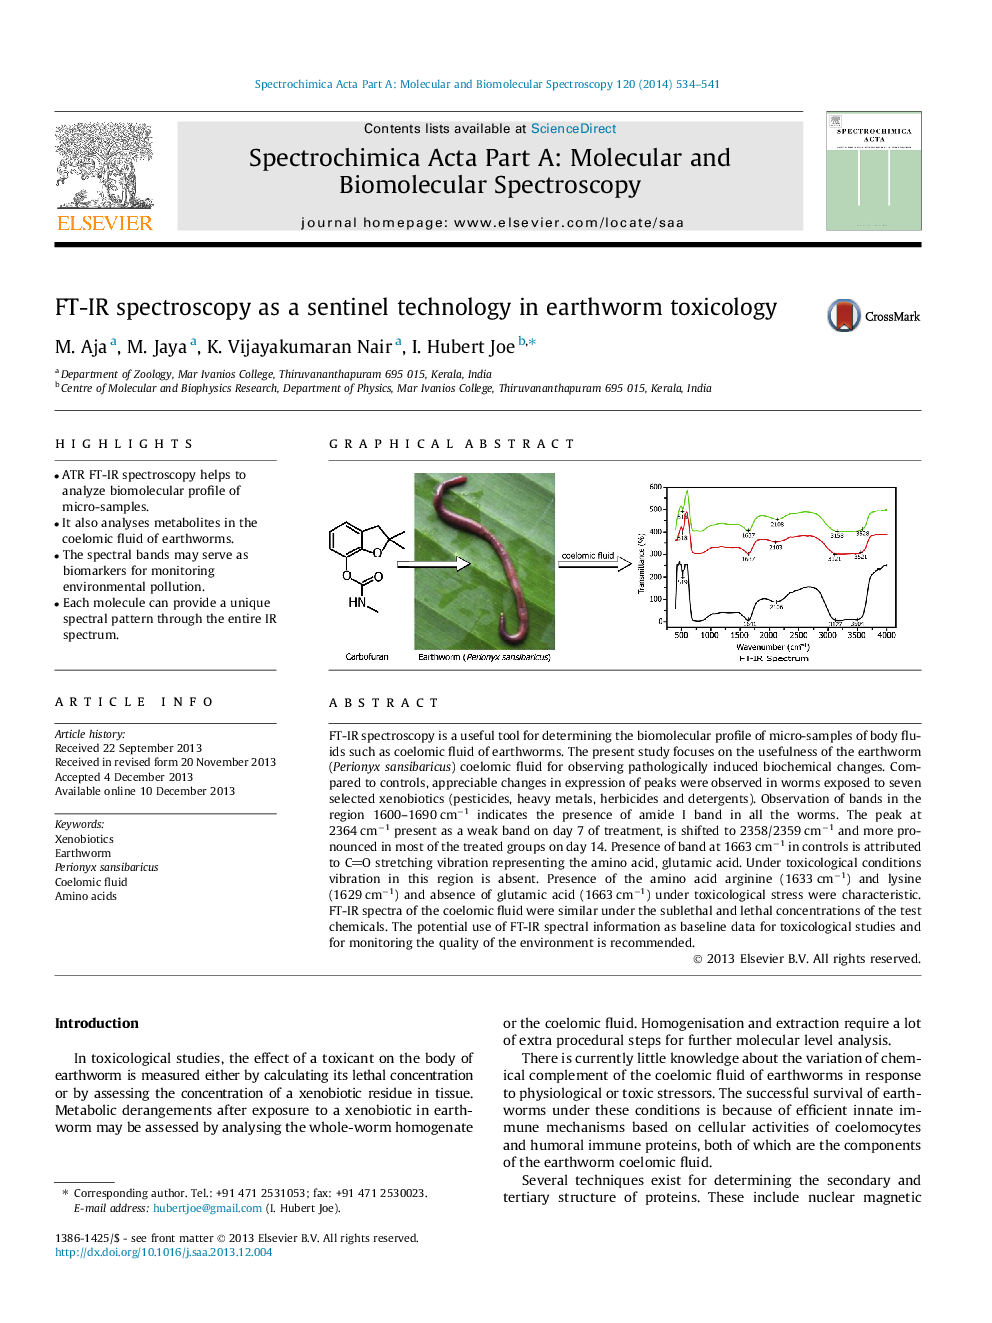 FT-IR spectroscopy as a sentinel technology in earthworm toxicology